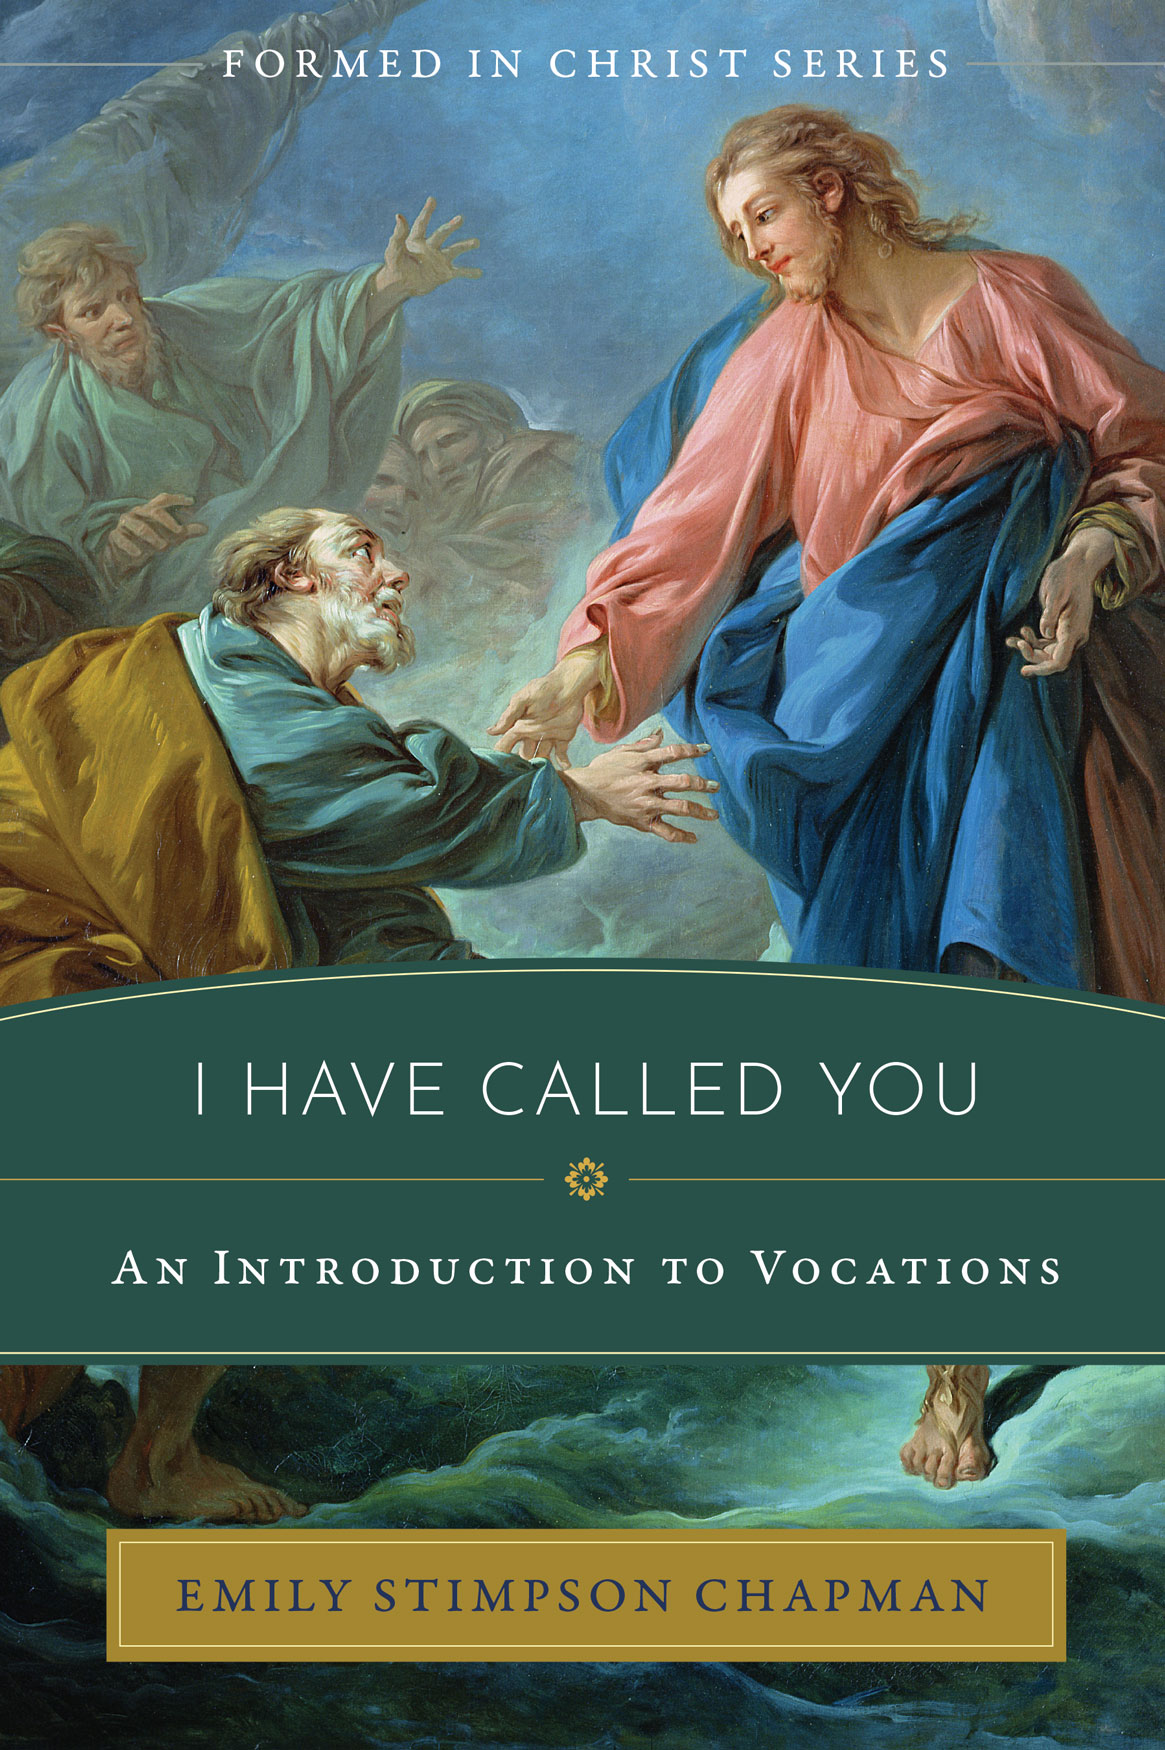 Formed in Christ I Have Called You / Emily Stimpson Chapman